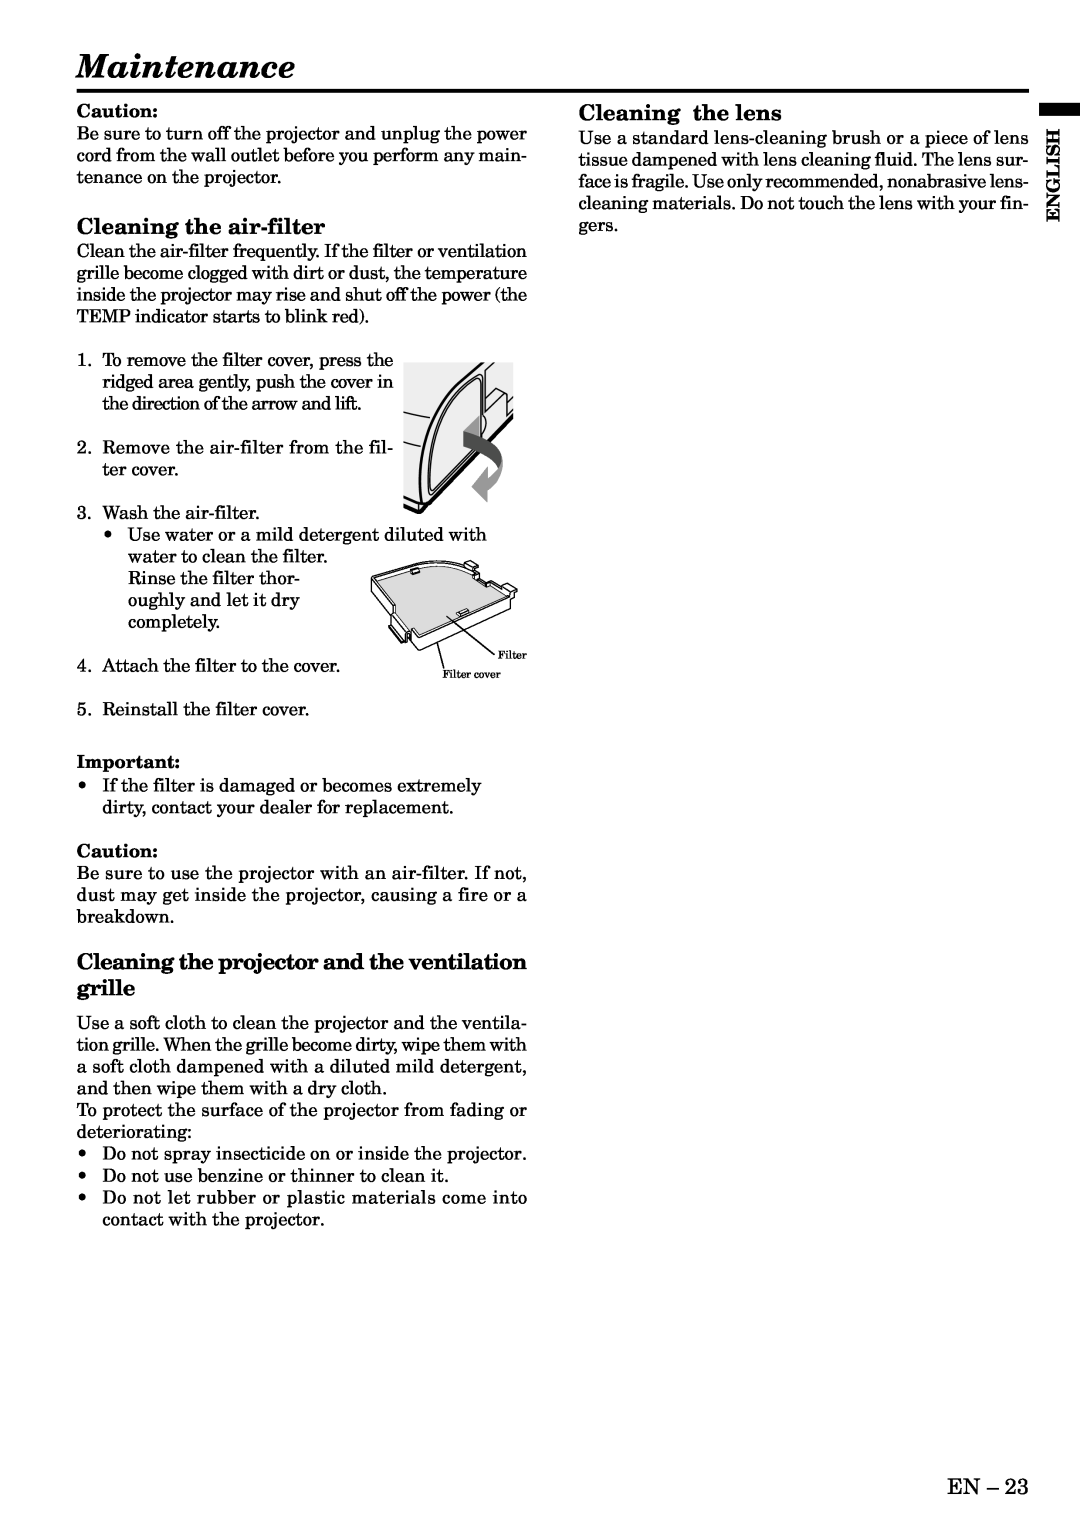 Mitsubishi Electronics XL2U user manual Maintenance, Cleaning the air-filter, Cleaning the lens 